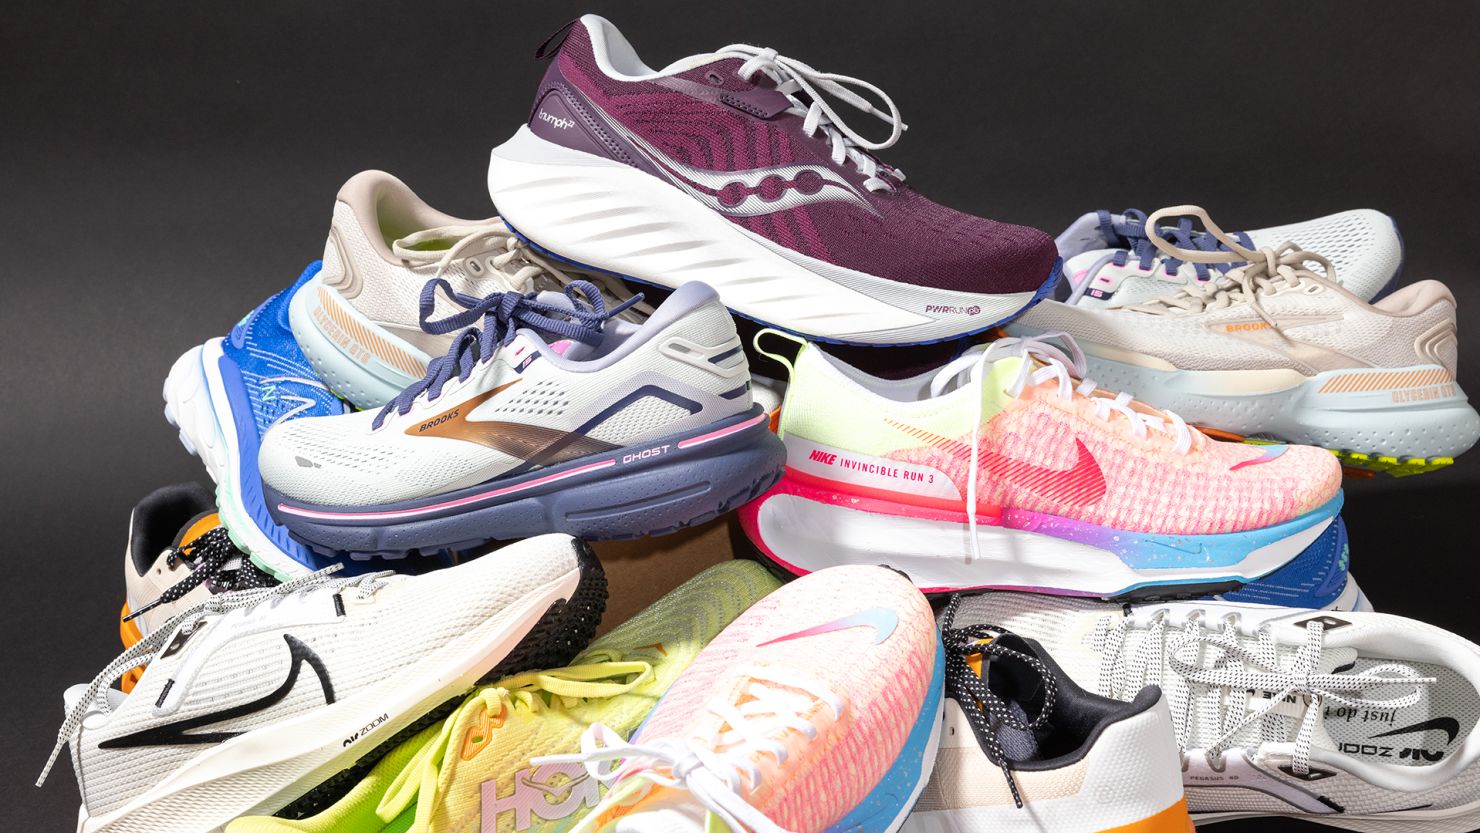 We Named These The Best Running Shoes With Arch Support—and They're on Sale